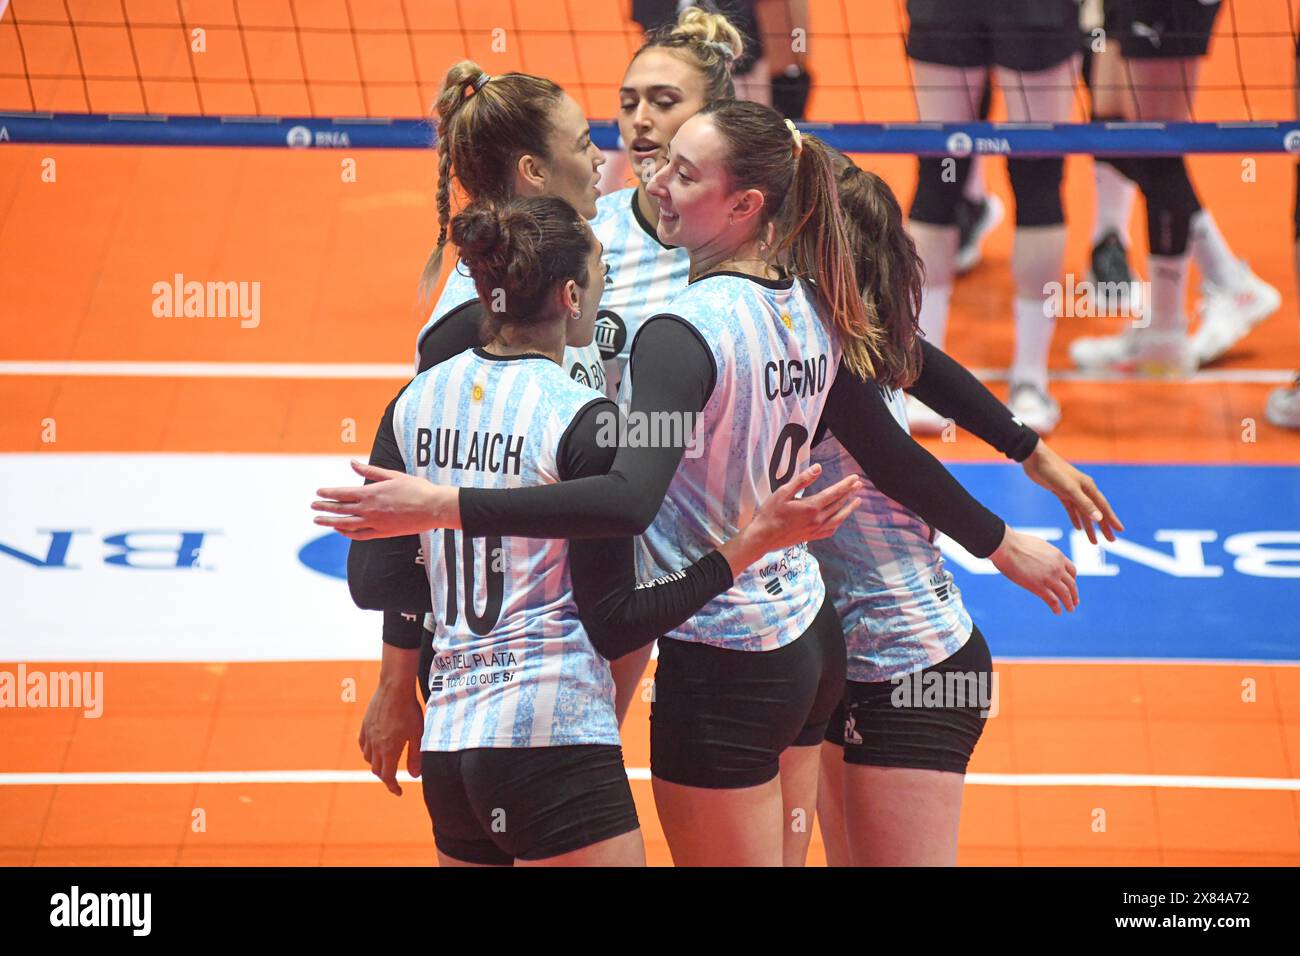 Équipe nationale Argentine de volleyball. Volley-ball féminin. Banque D'Images